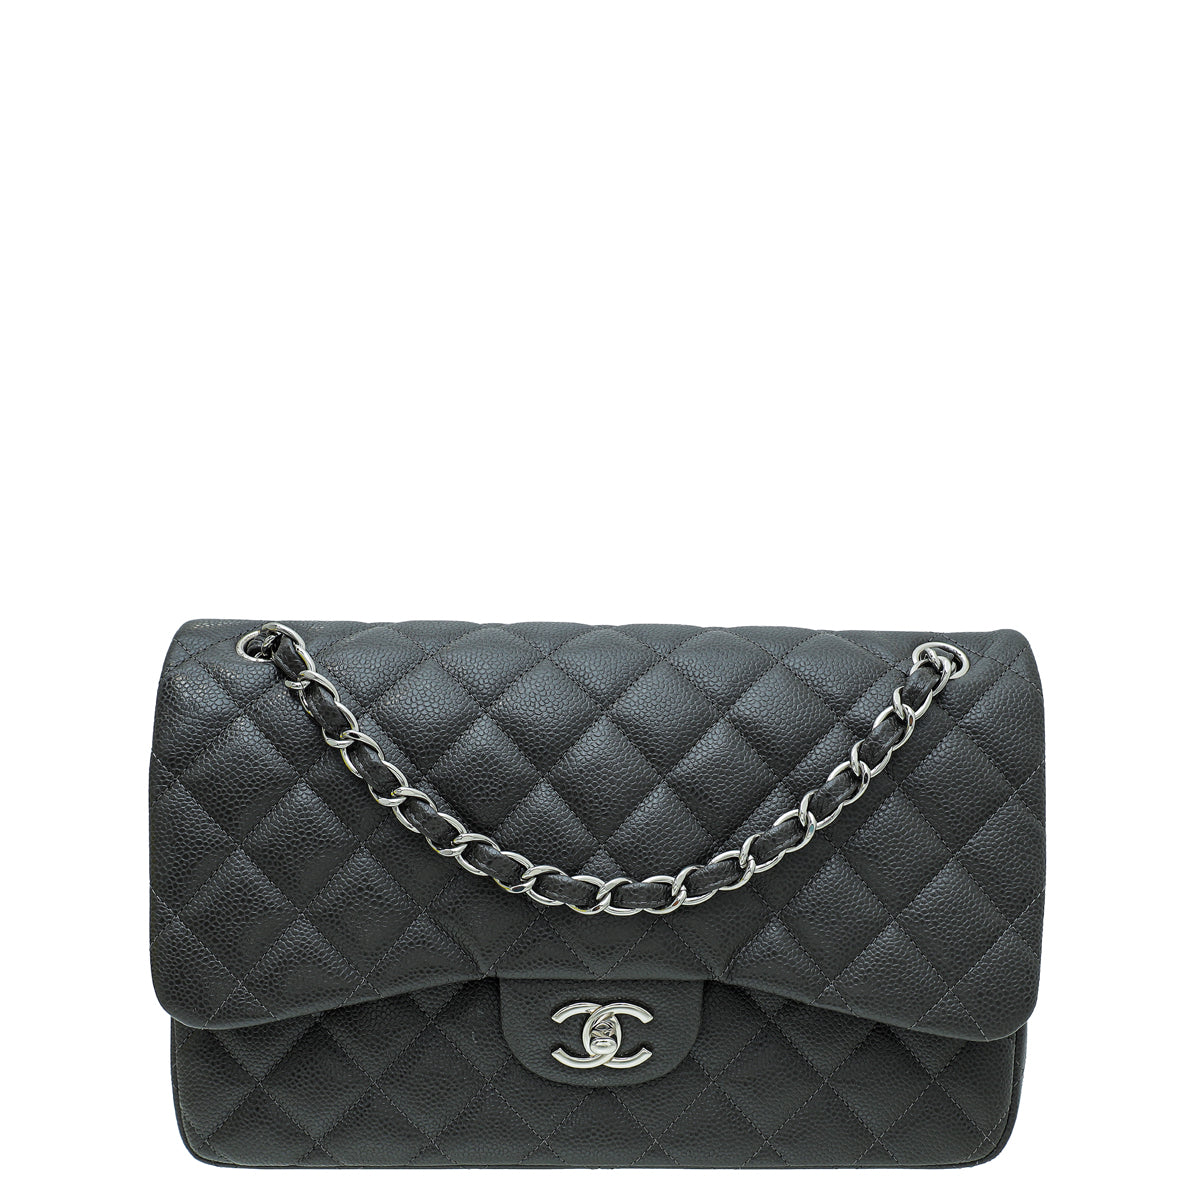 Chanel White Aged Gabrielle Hobo Small Bag – The Closet